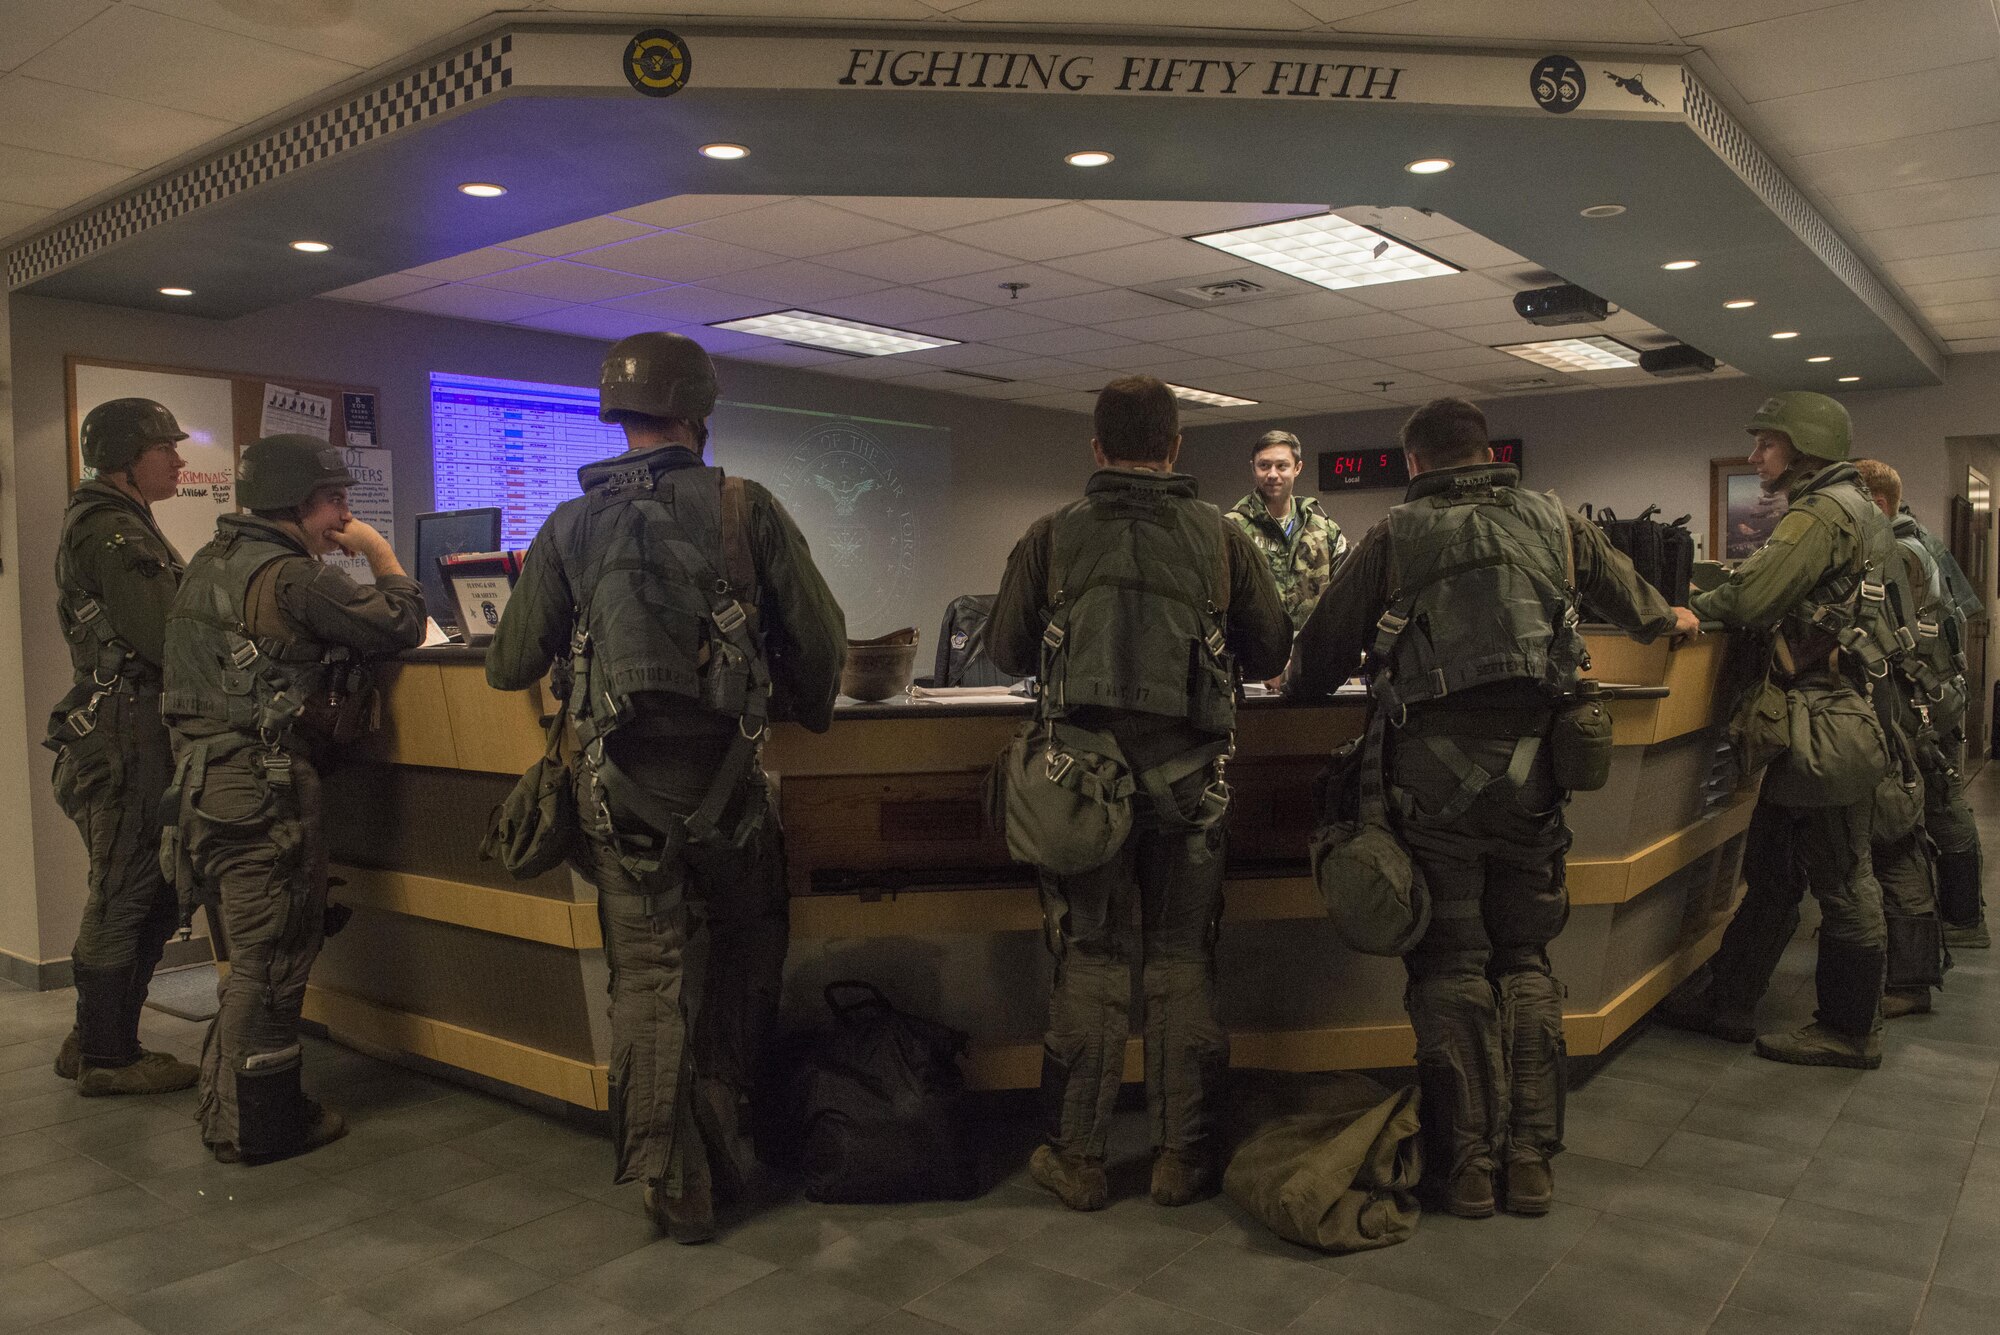 U.S. Air Force pilots assigned to the 55th Fighter Squadron meet for a pre-flight brief at the unit operations desk at Shaw Air Force Base, South Carolina, Nov. 16, 2017.